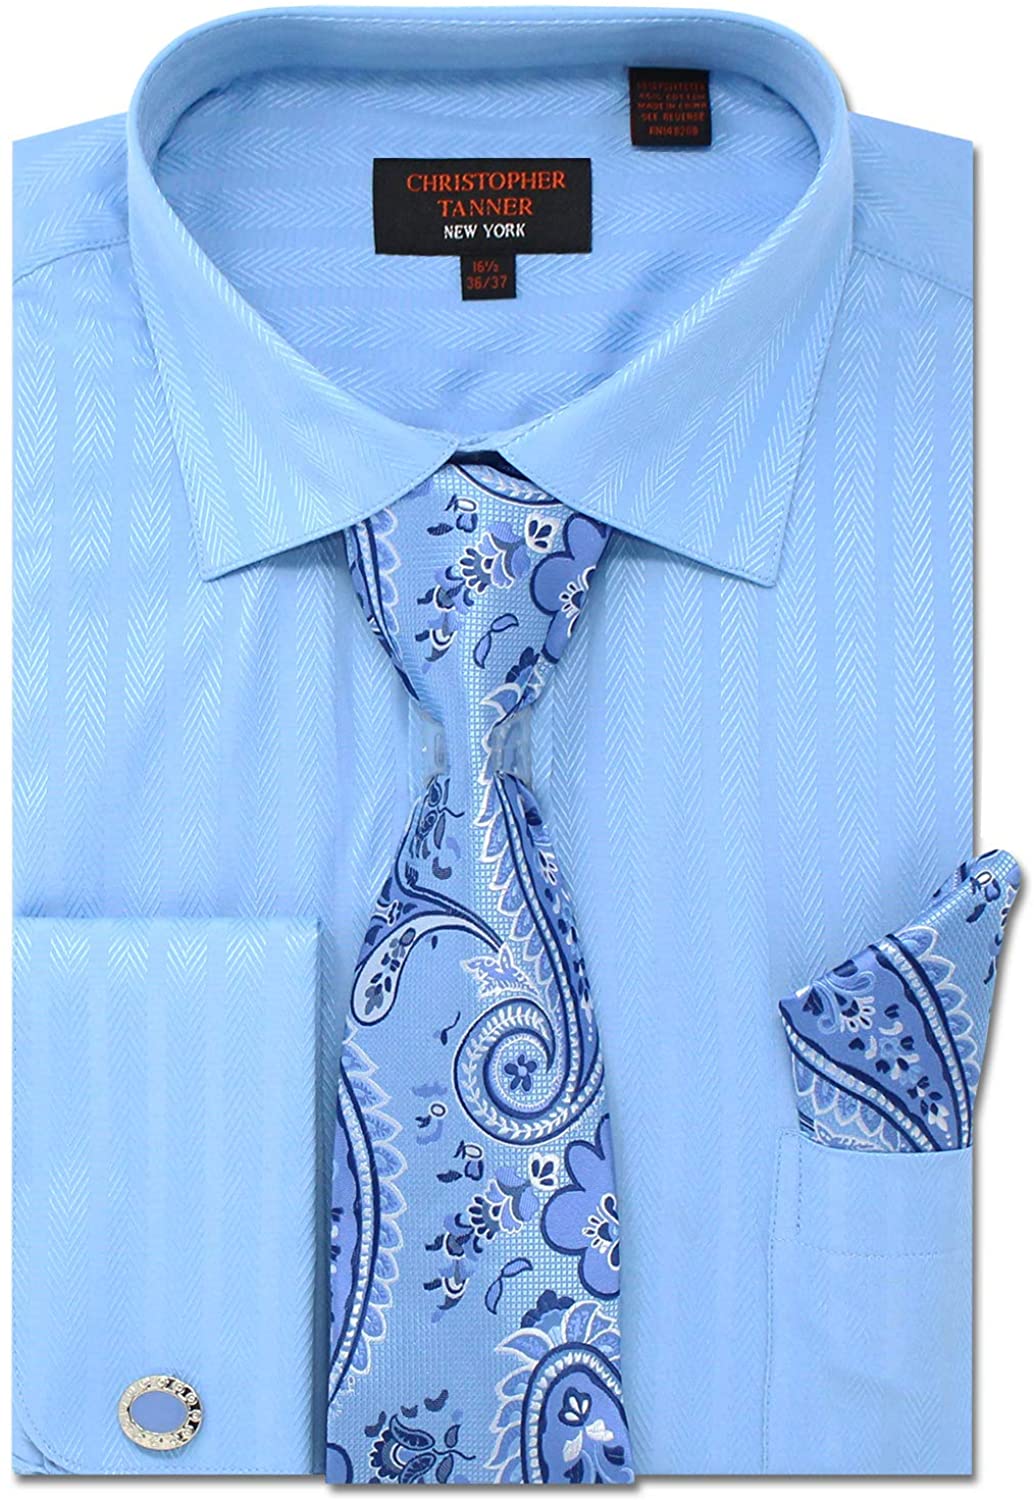 Details about   Men's Solid Herringbone Striped Pattern Regular Fit Dress Shirts with Tie Hanky 